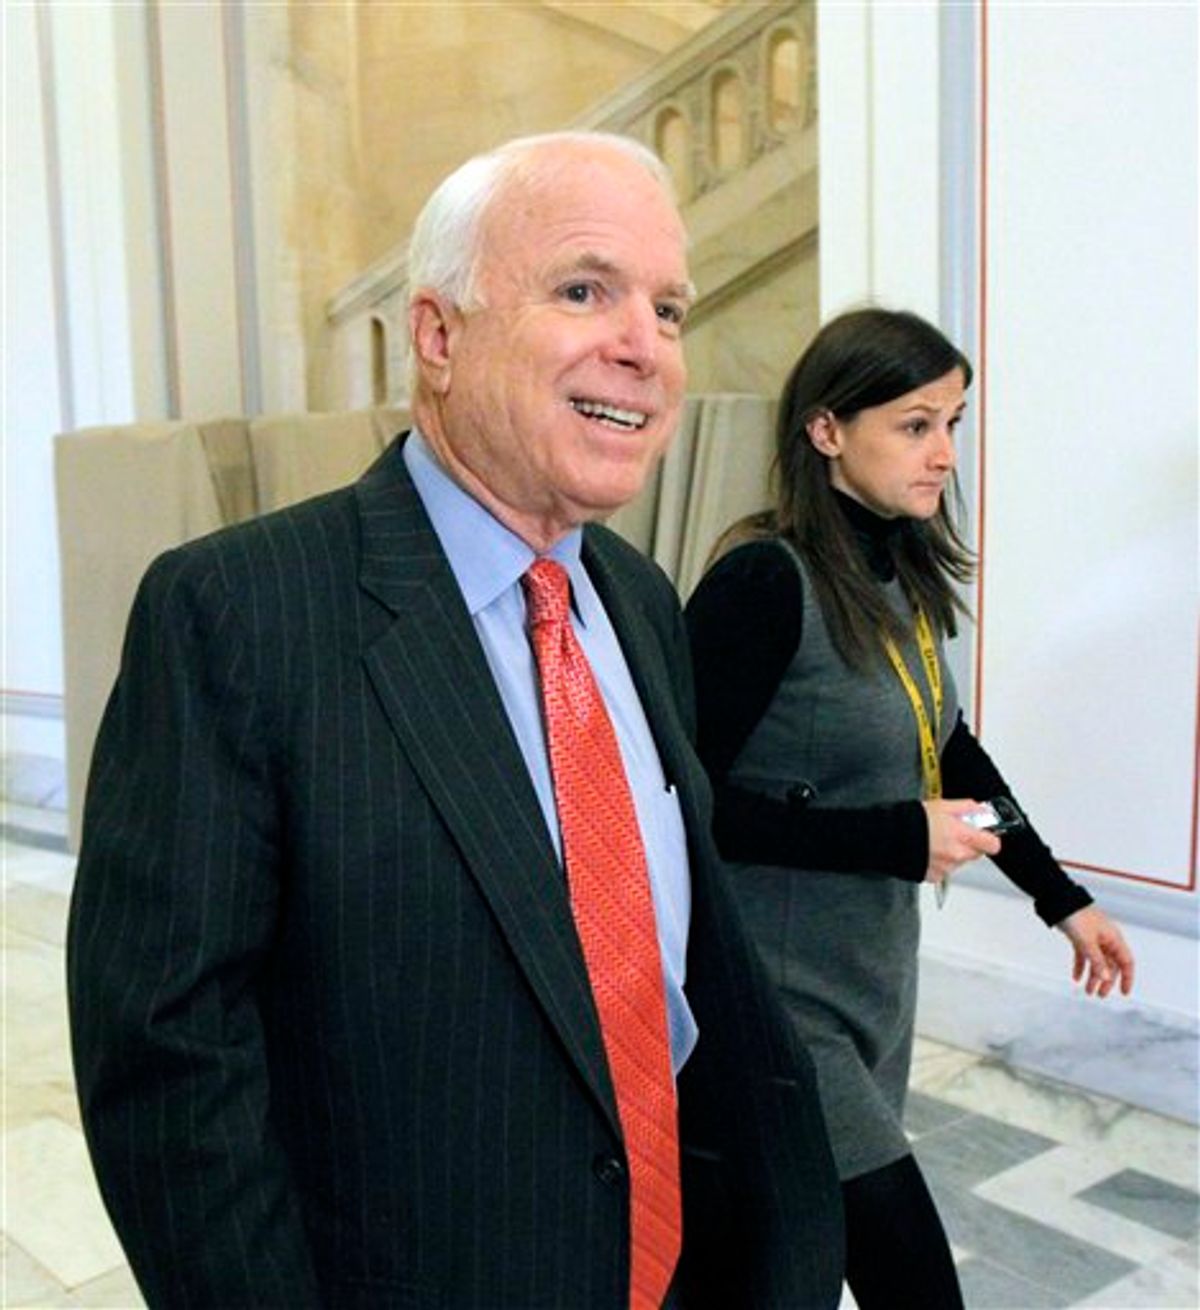 Sen. John McCain, R-Ariz., the ranking  member of the Senate Armed Services Committee, walks on Capitol Hill in Washington Tuesday, Nov. 30, 2010, as committee staff members are receiving a briefing on the Armed Services Don't Ask Don't Tell survey. (AP Photo/Alex Brandon) (AP)